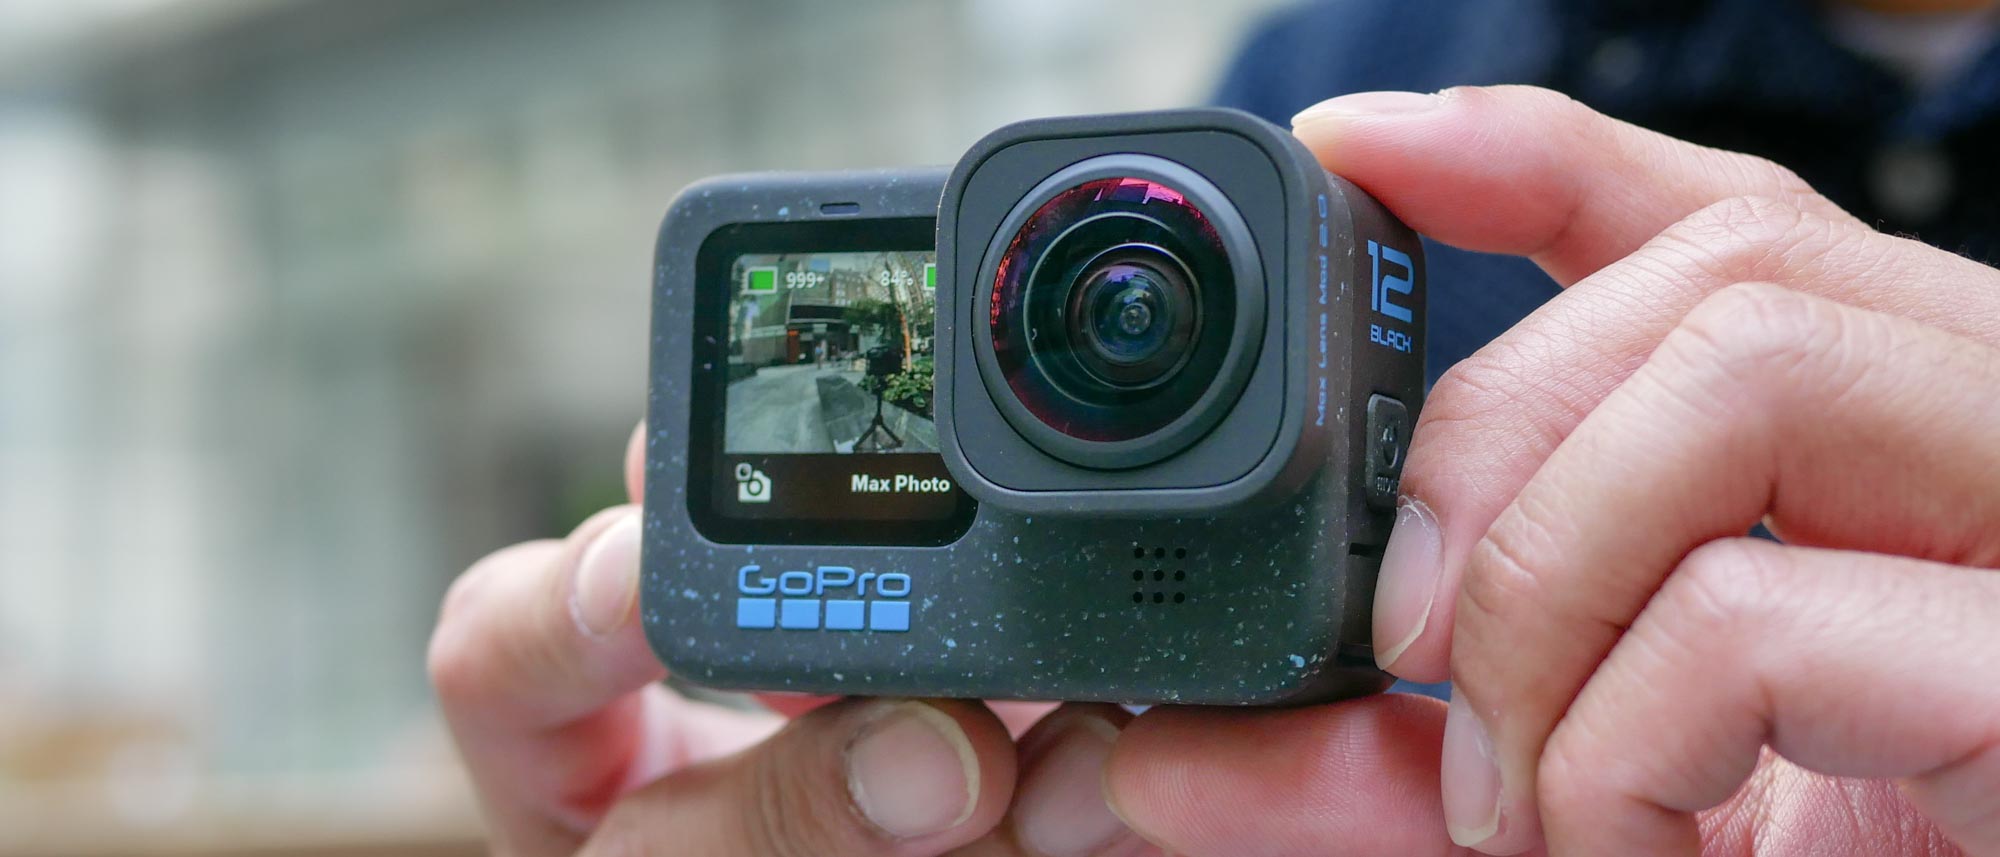 How To Watch Gopro On TV